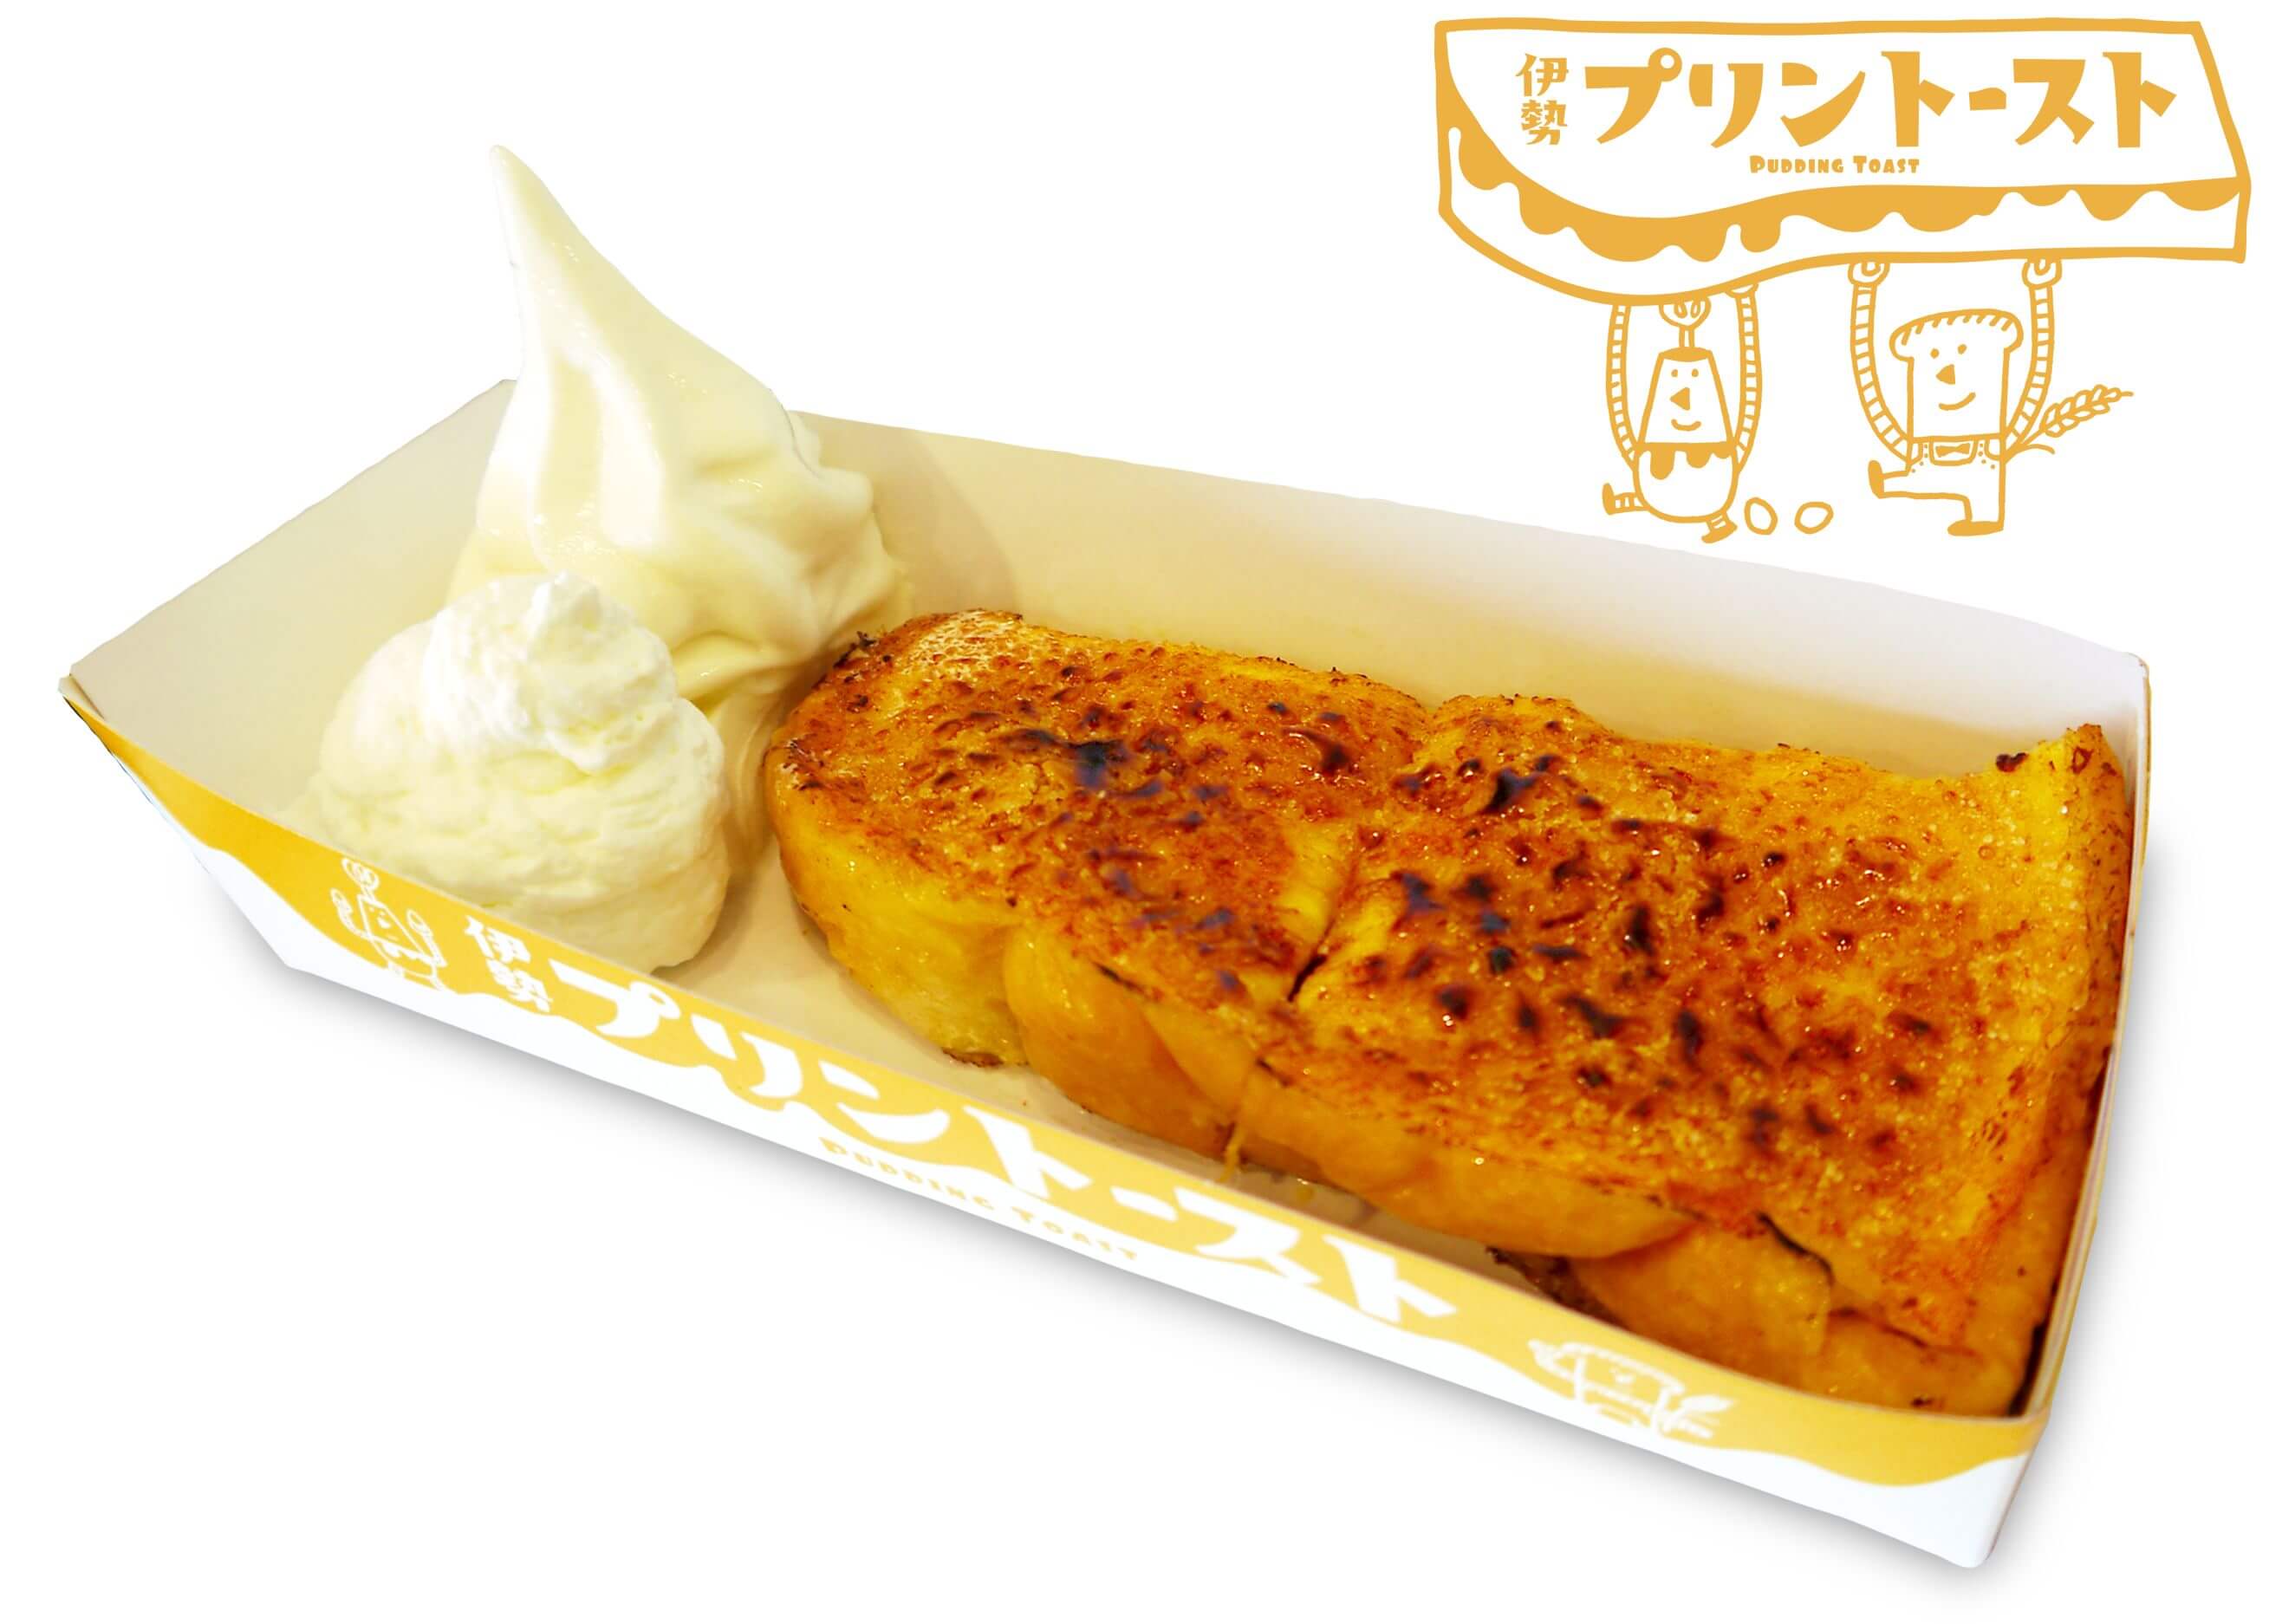 New Purin Shop ‘Ise Purin no Tetsujin’ Sells Japan’s First Purin Toast